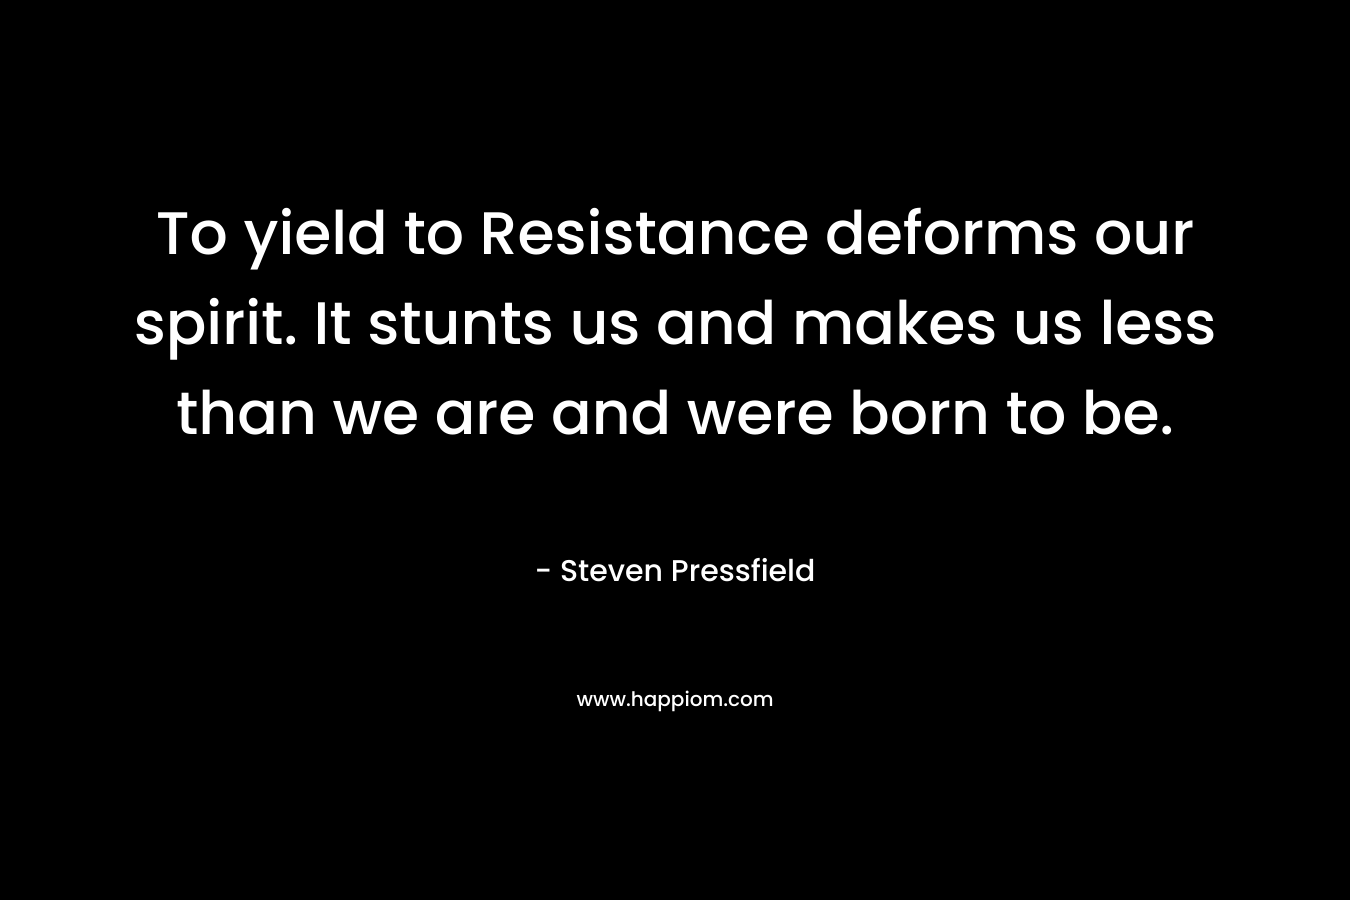 To yield to Resistance deforms our spirit. It stunts us and makes us less than we are and were born to be.